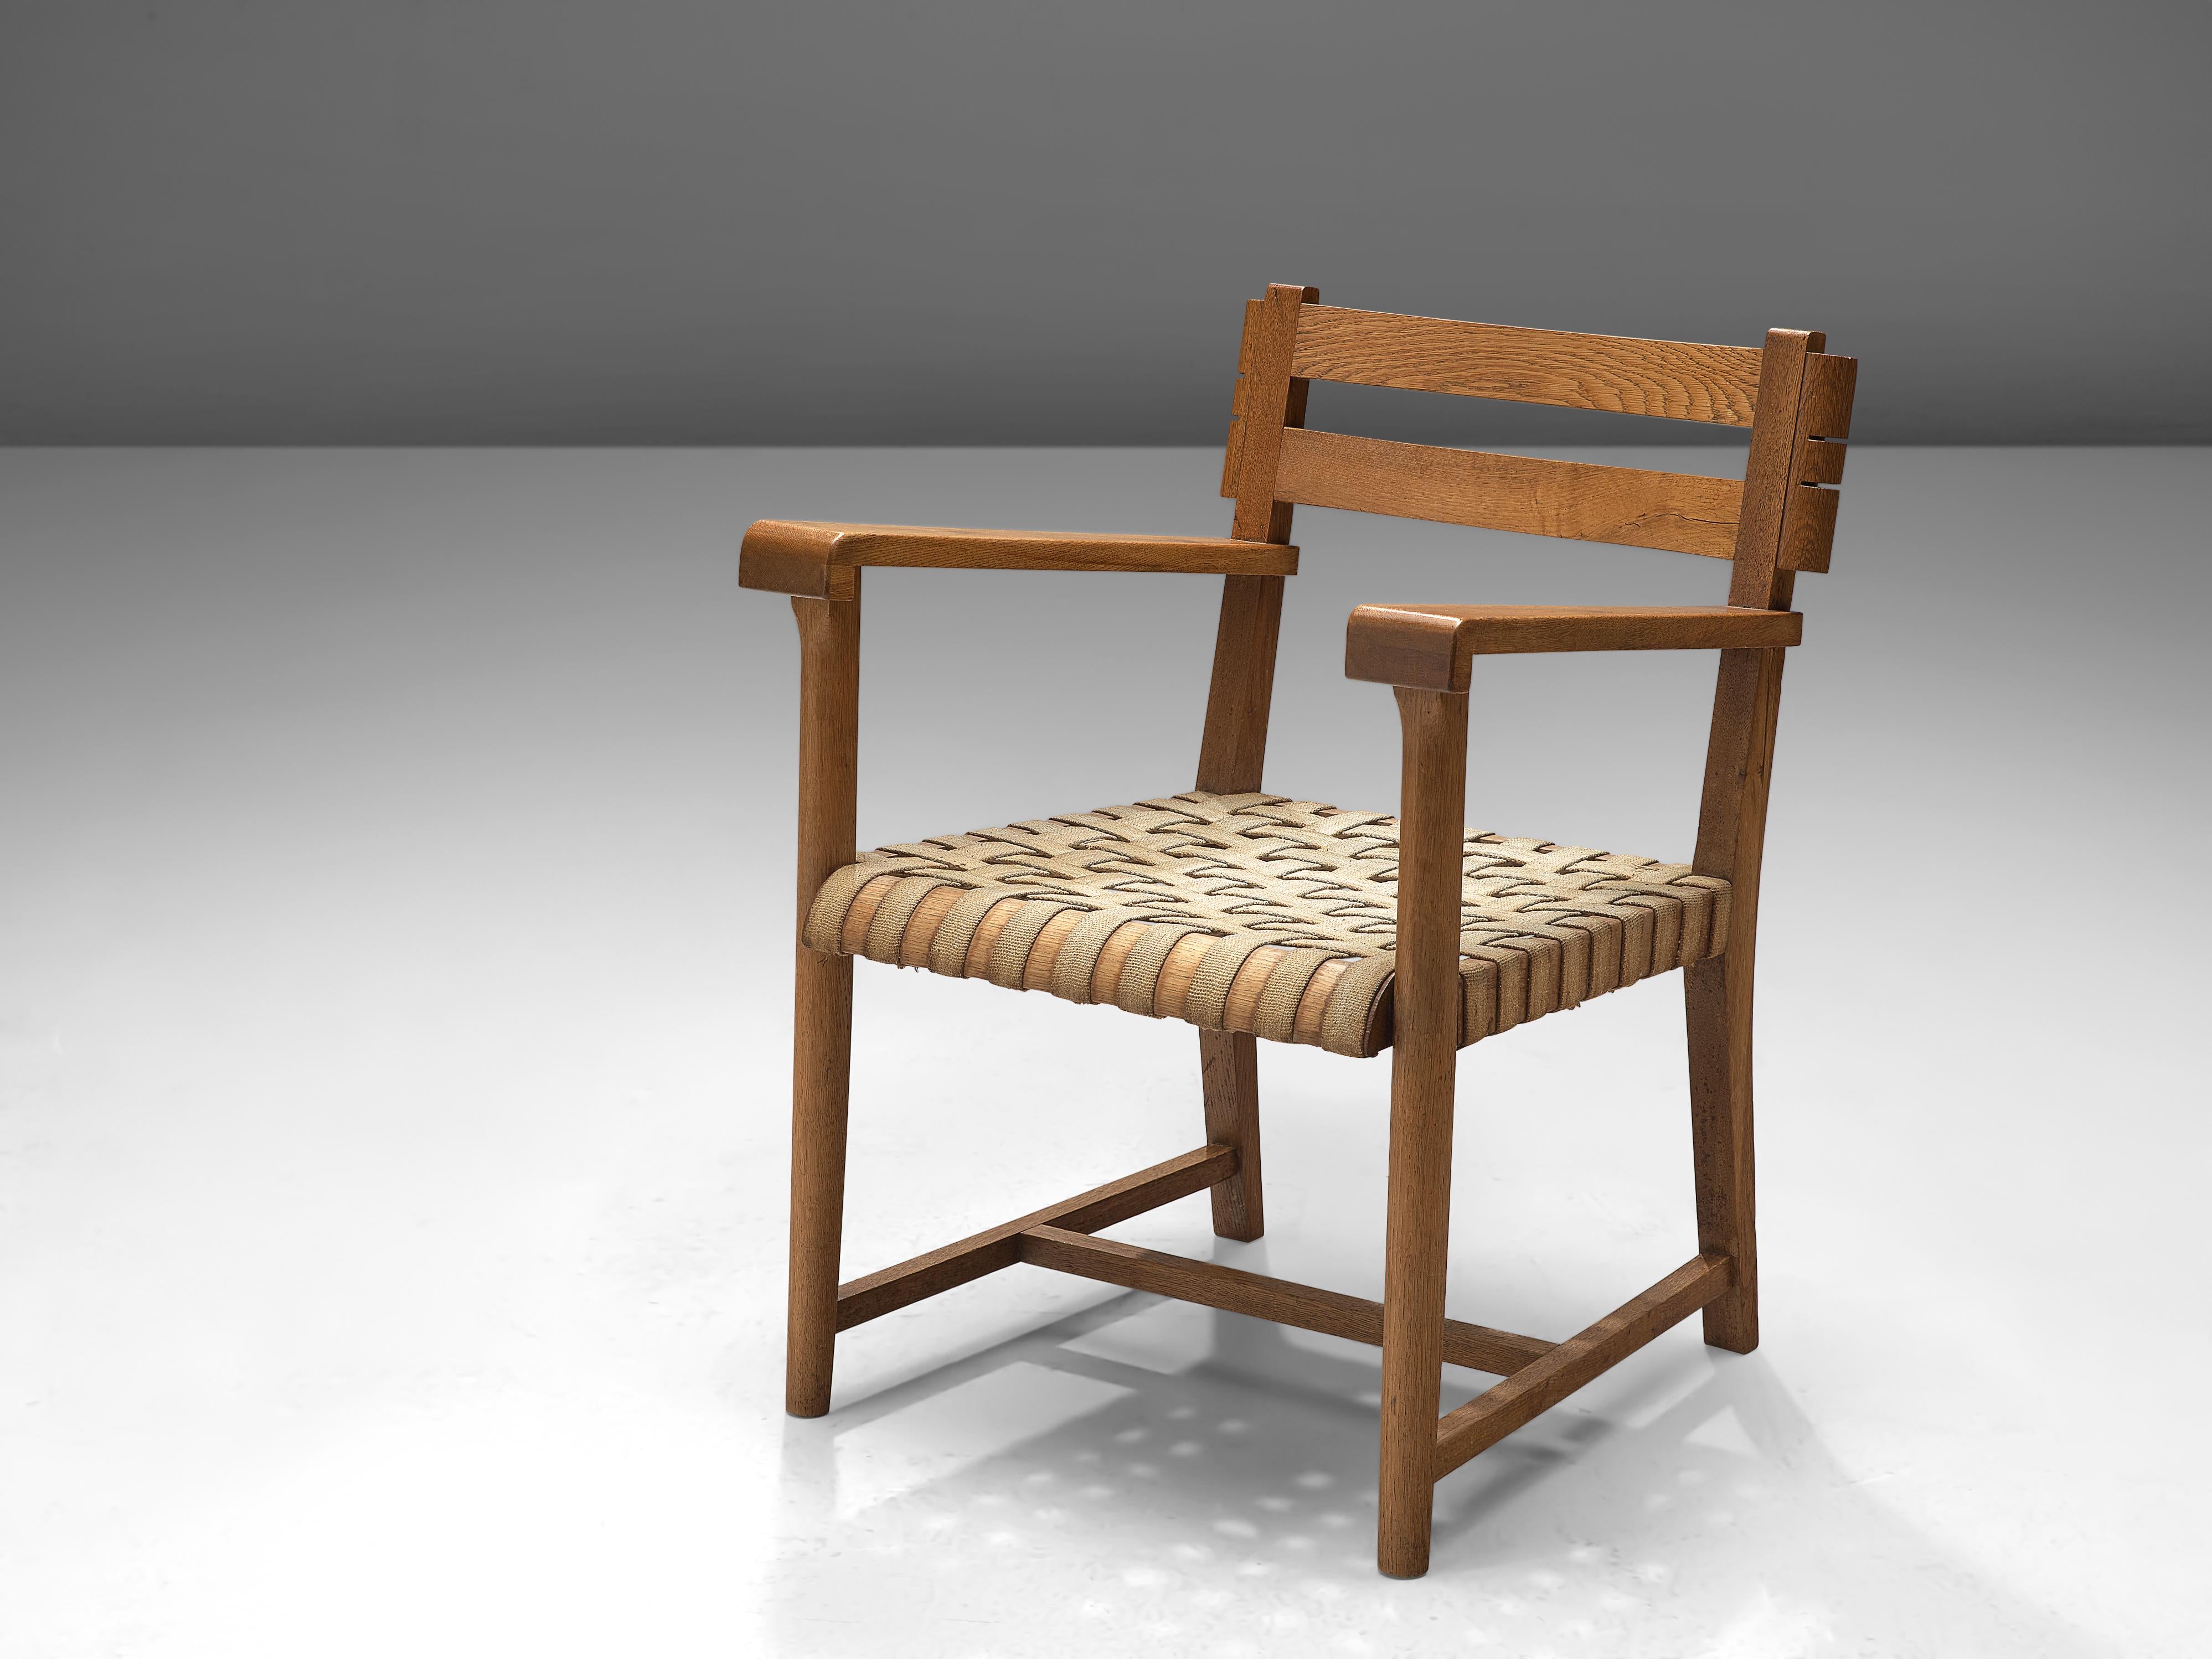 French Art Deco Armchair in Solid Oak with Woven Canvas Seat